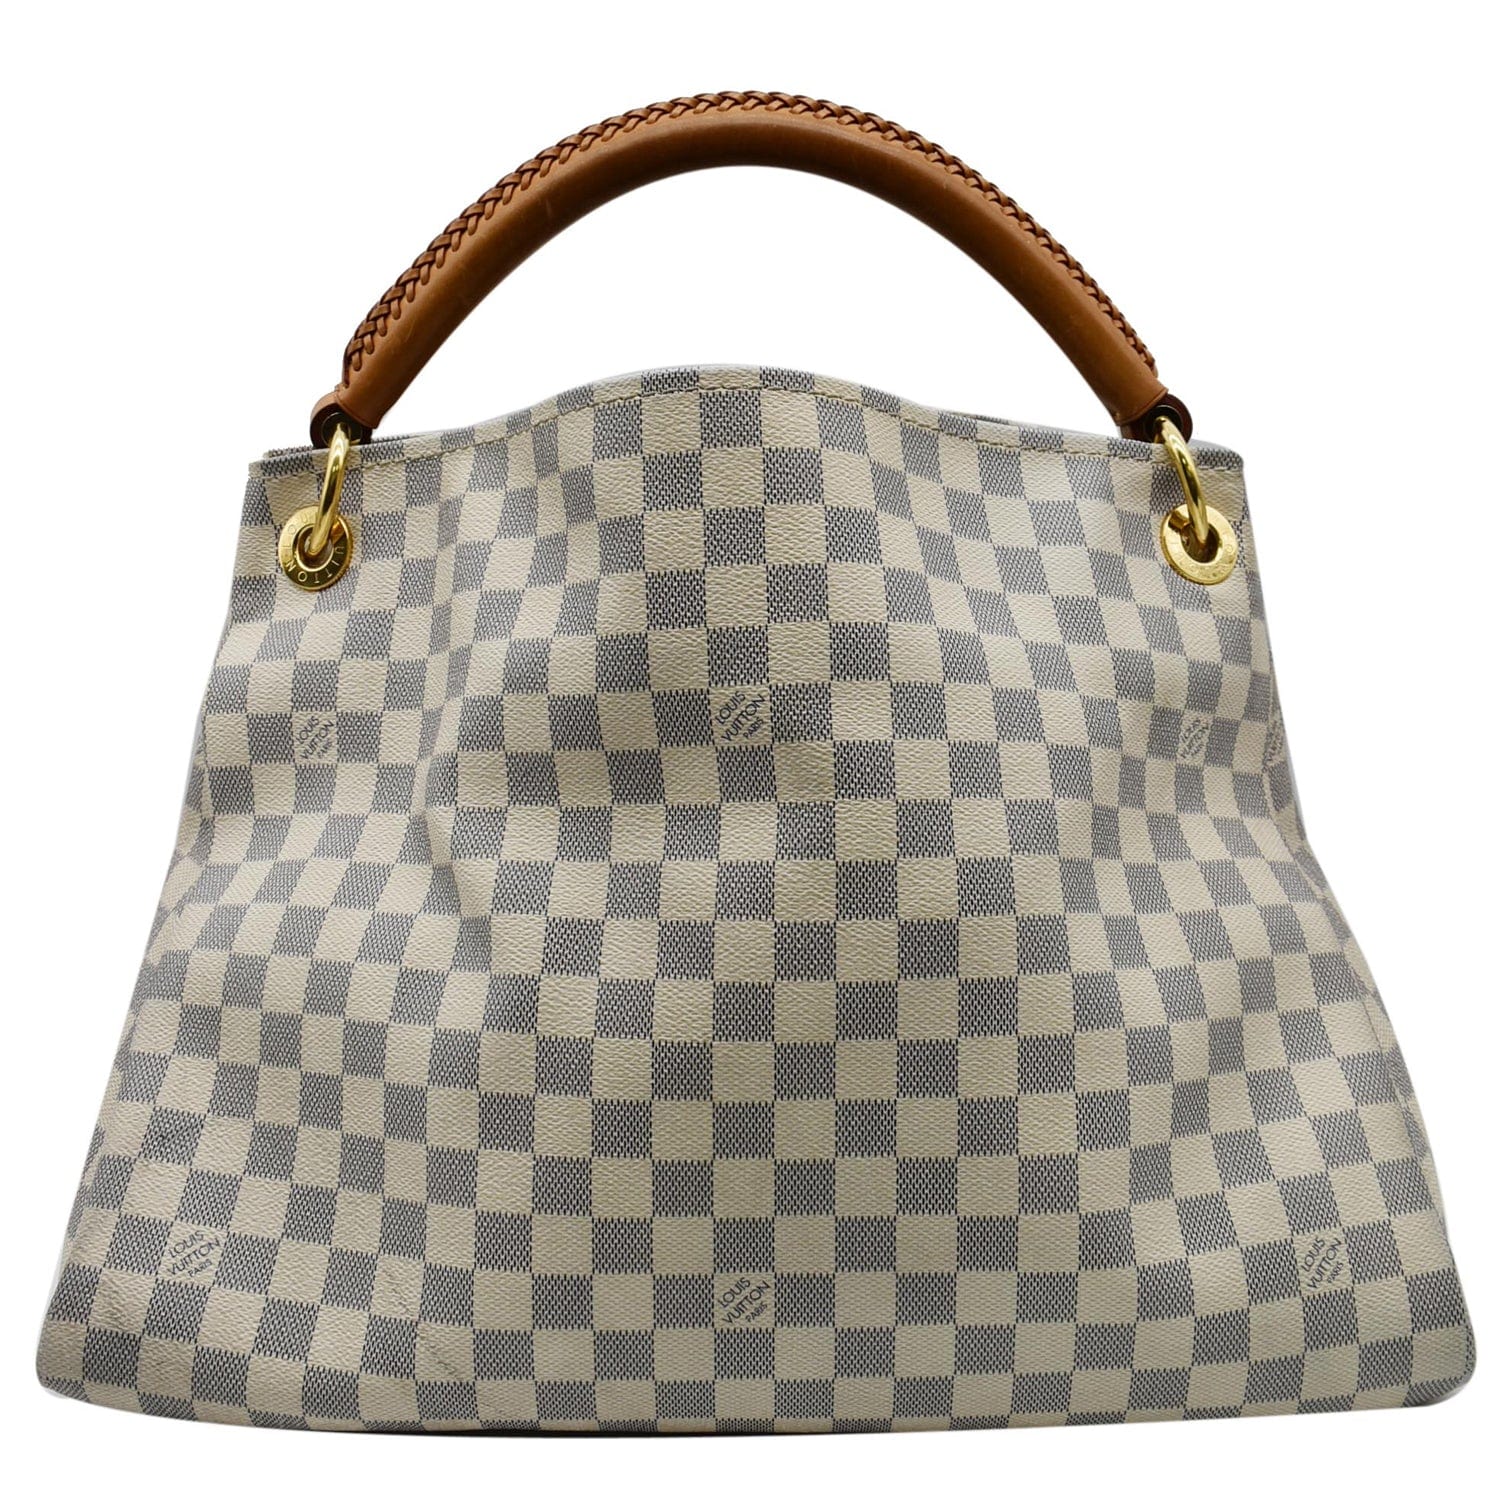 The Louis Vuitton Artsy in Azur Damier canvas is a beautiful bag. This